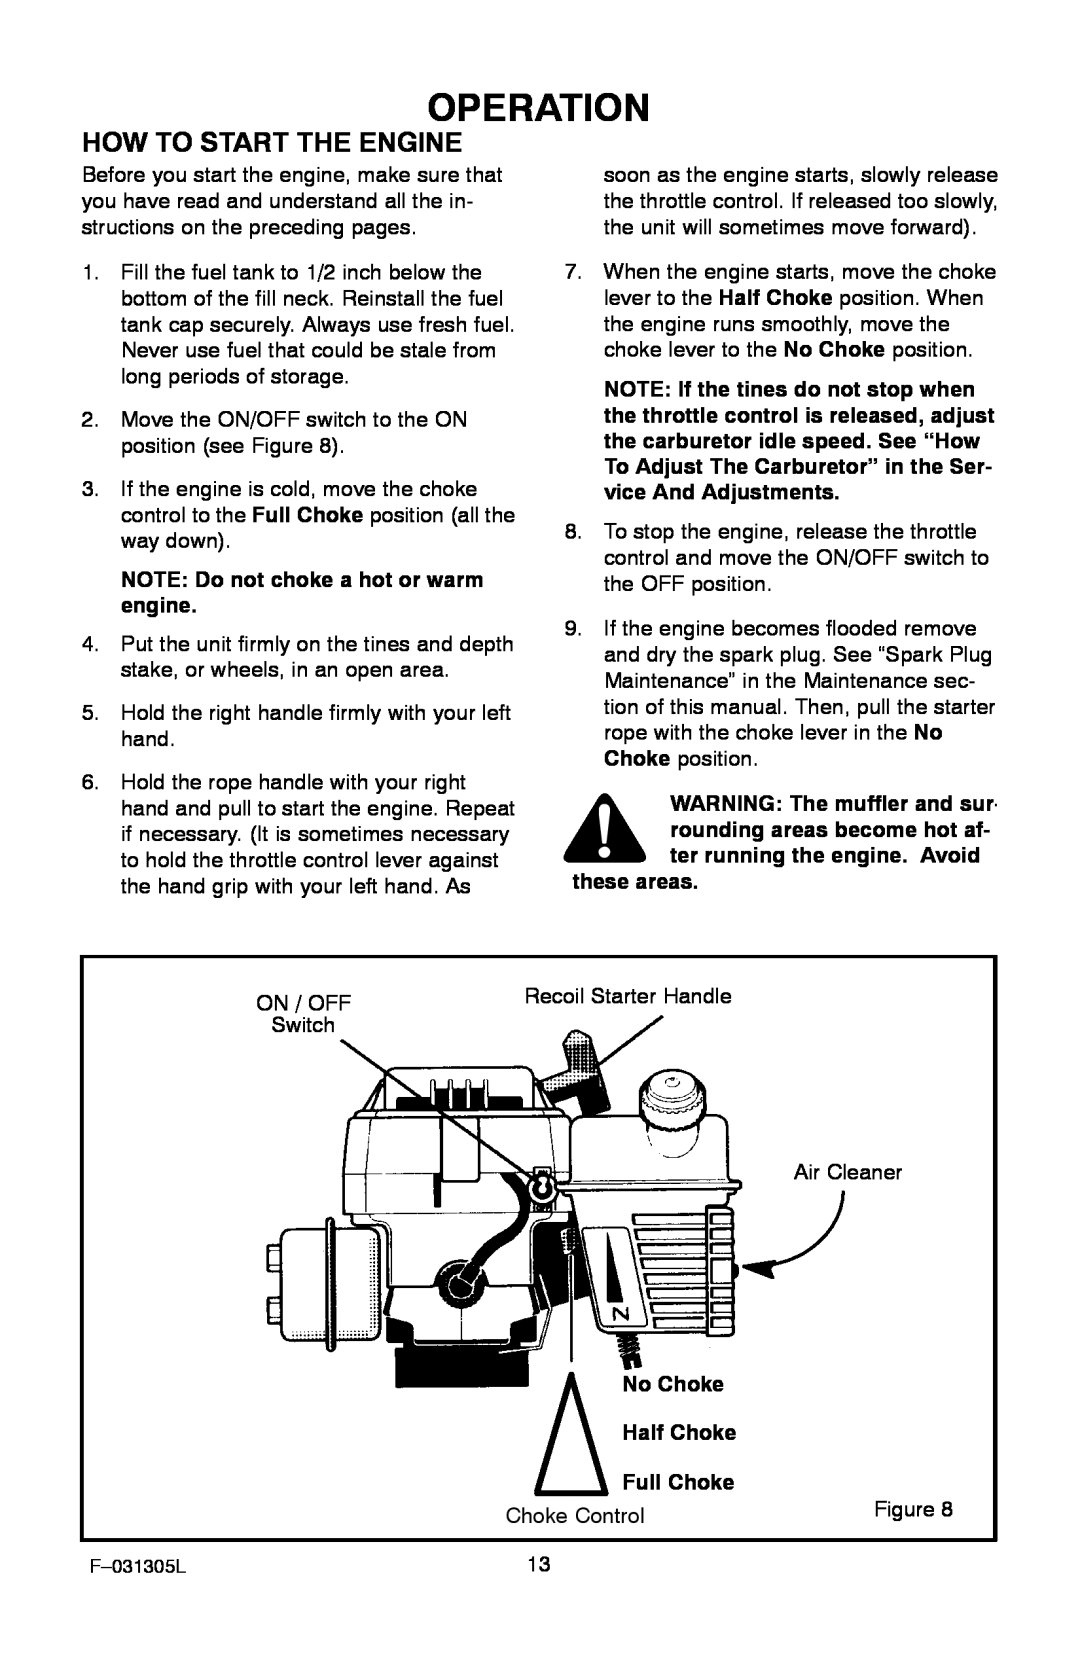 Murray 11052x92D manual Operation, How To Start The Engine, NOTE Do not choke a hot or warm engine, these areas, No Choke 